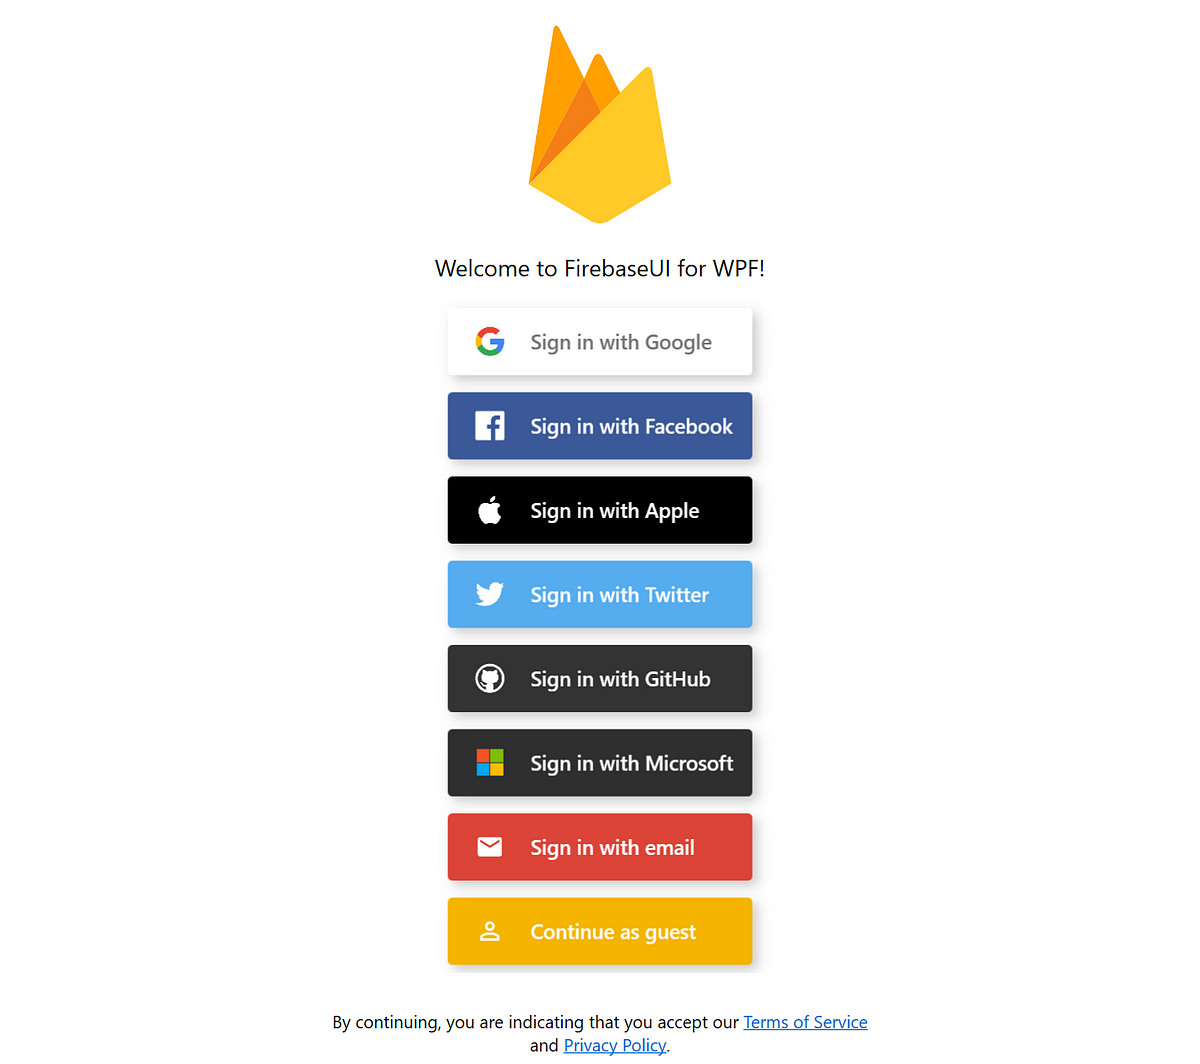 Easily add sign-in to your Android app with FirebaseUI